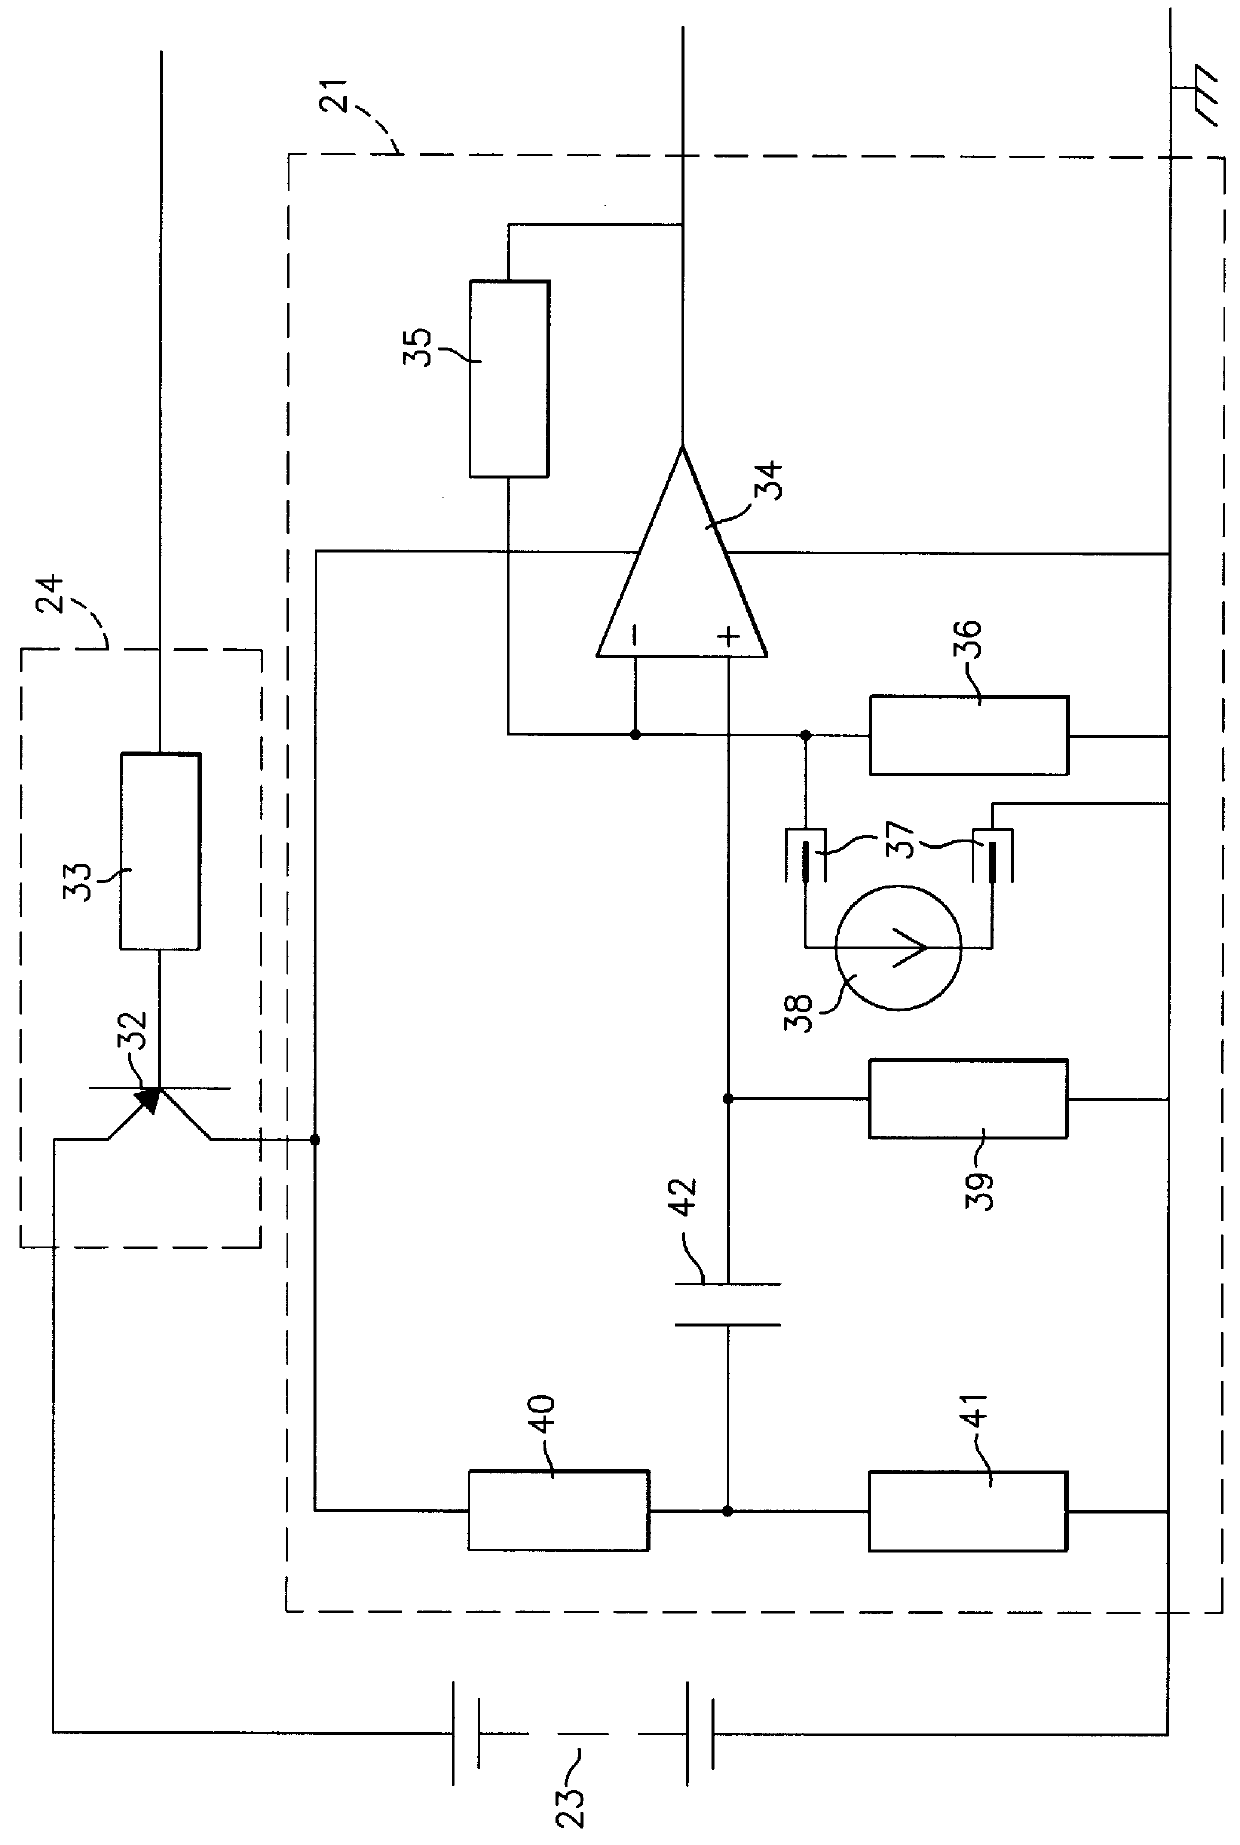 Gas detecting apparatus having condition monitoring means